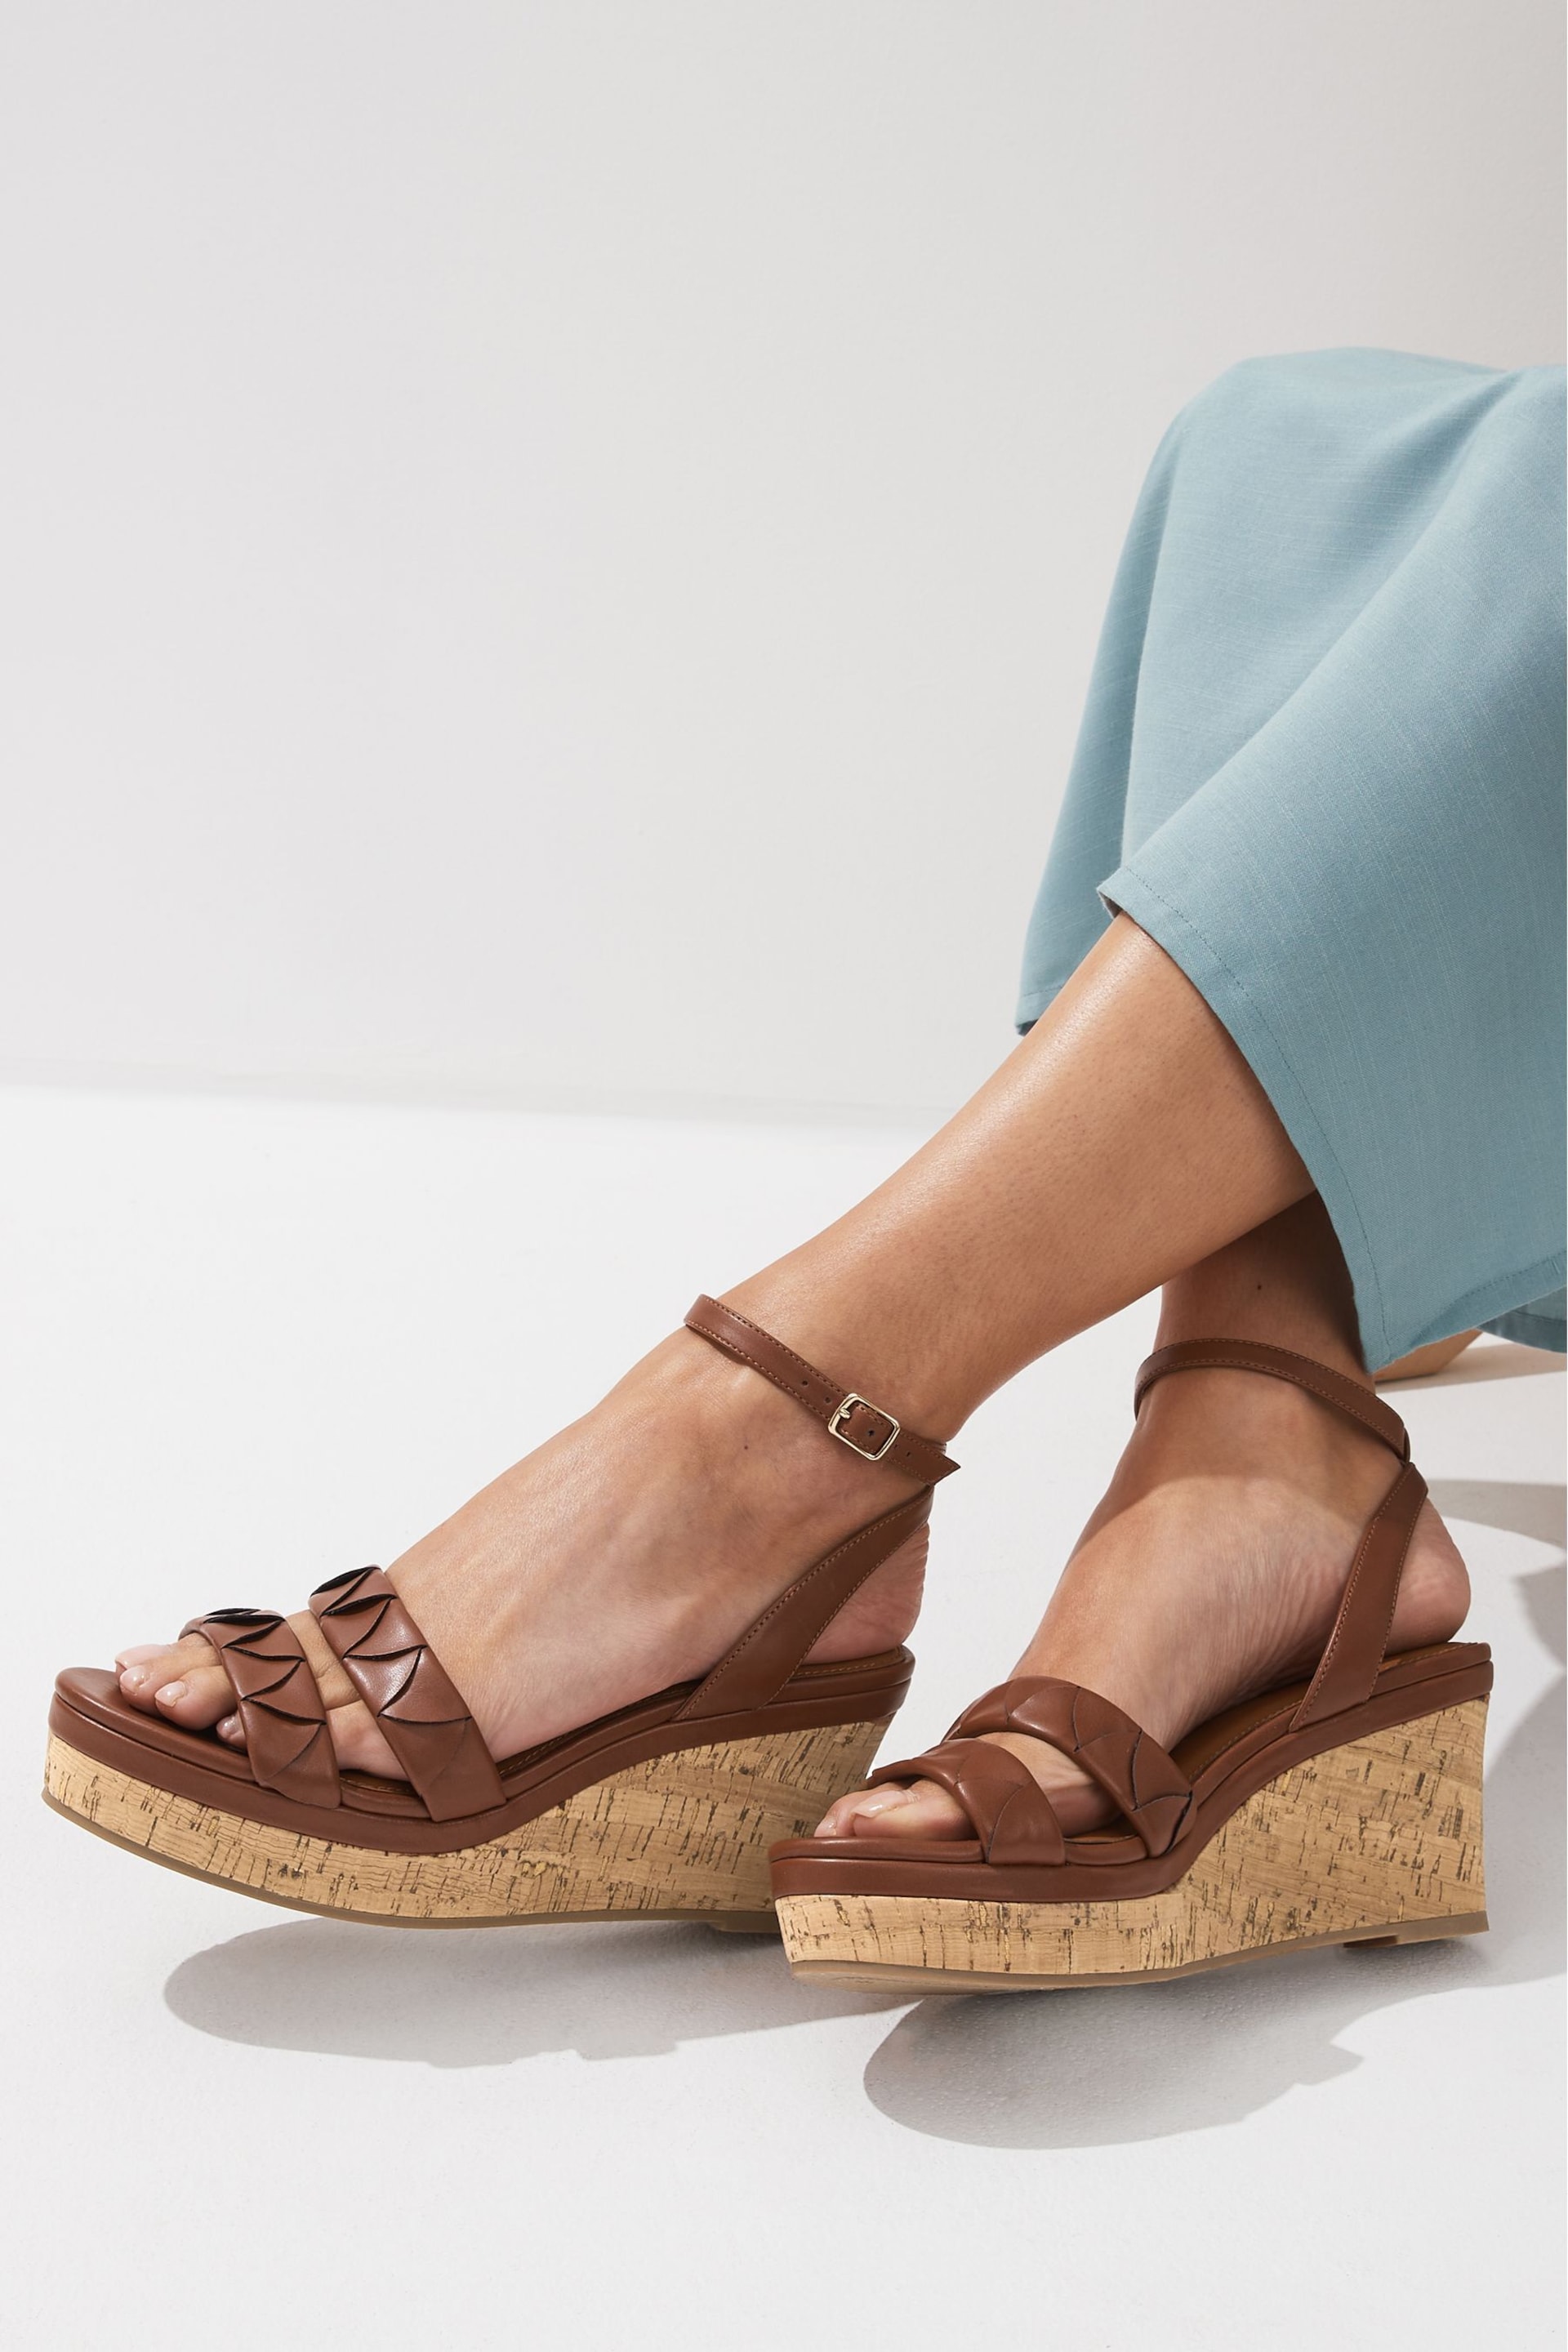 Tan Brown Regular/Wide Fit Forever Comfort® Double Strap Wedges - Image 1 of 9